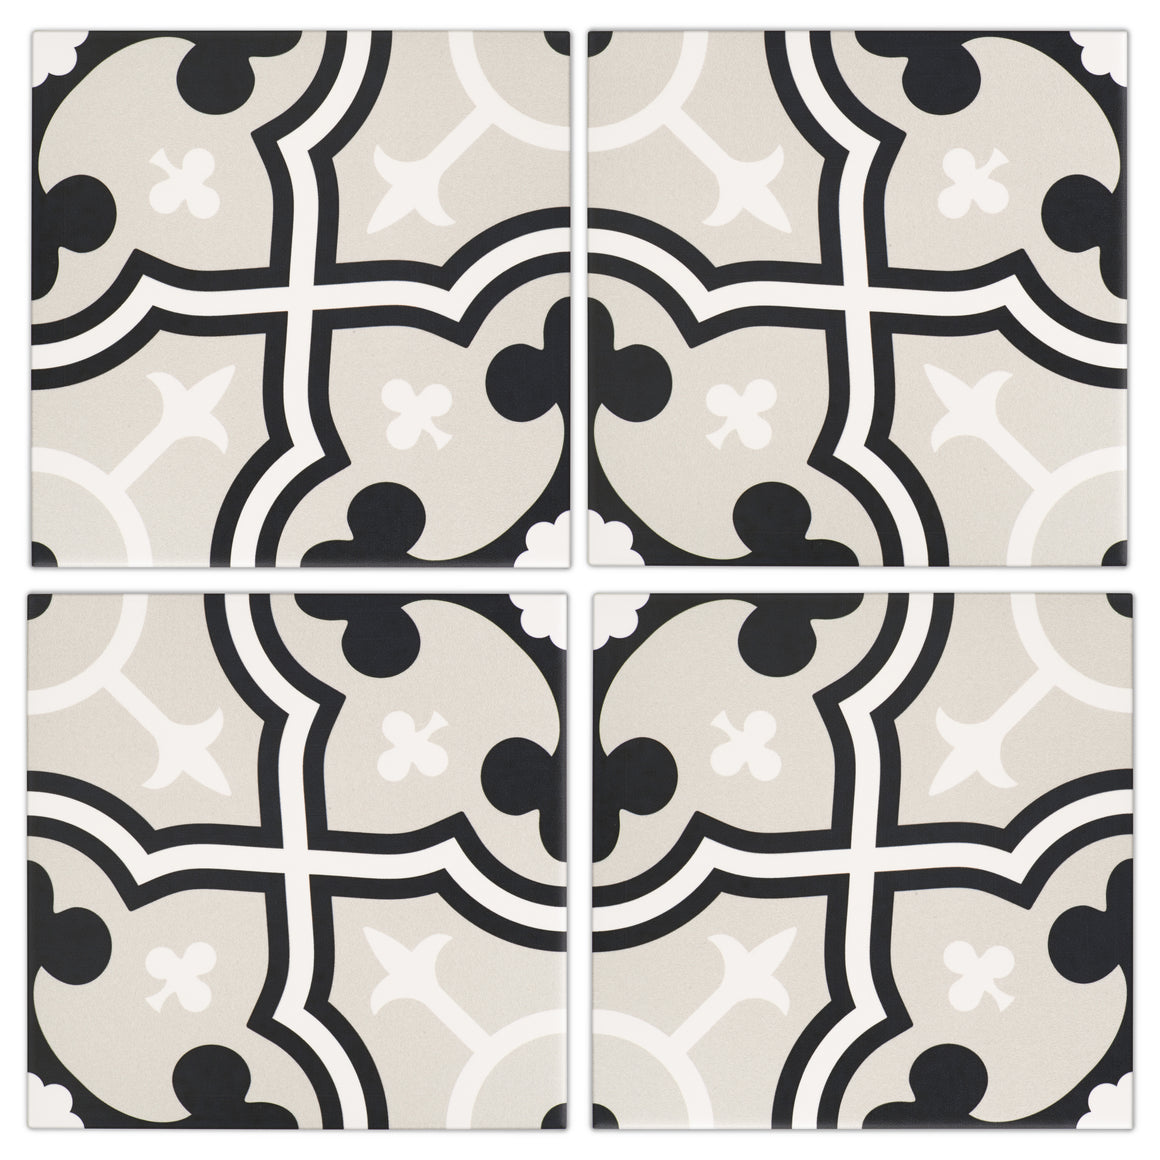 Vintique Black, Grey, White vintage matte porcelain decorative pattern tile for residential and commercial bathroom and kitchen floor and wall imported from Italy, Self more decor 9 available from TilesInspired Canada's Online Tile Store delivering across Ontario and Quebec, including Toronto, Montreal, Ottawa, London, Windsor, Kitchener, Muskoka, Barrie, Kingston, Hamilton, and Niagara decoration idea